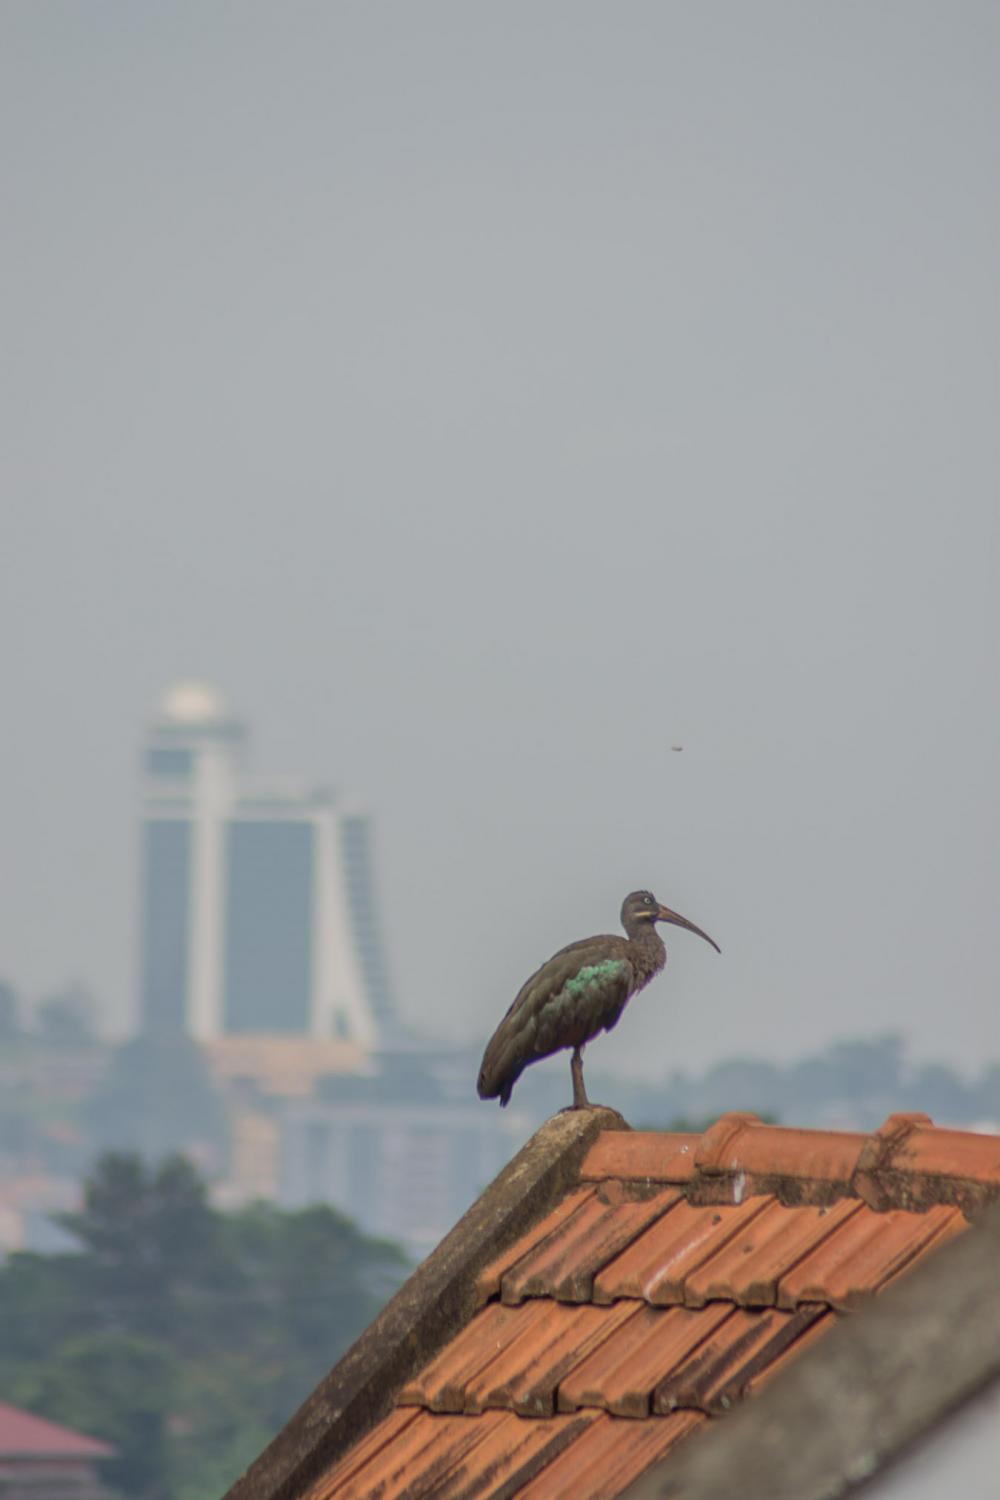 ESCAPING LOCKDOWN - A Hadada ibis, perched on a roof in the neighboorhood.